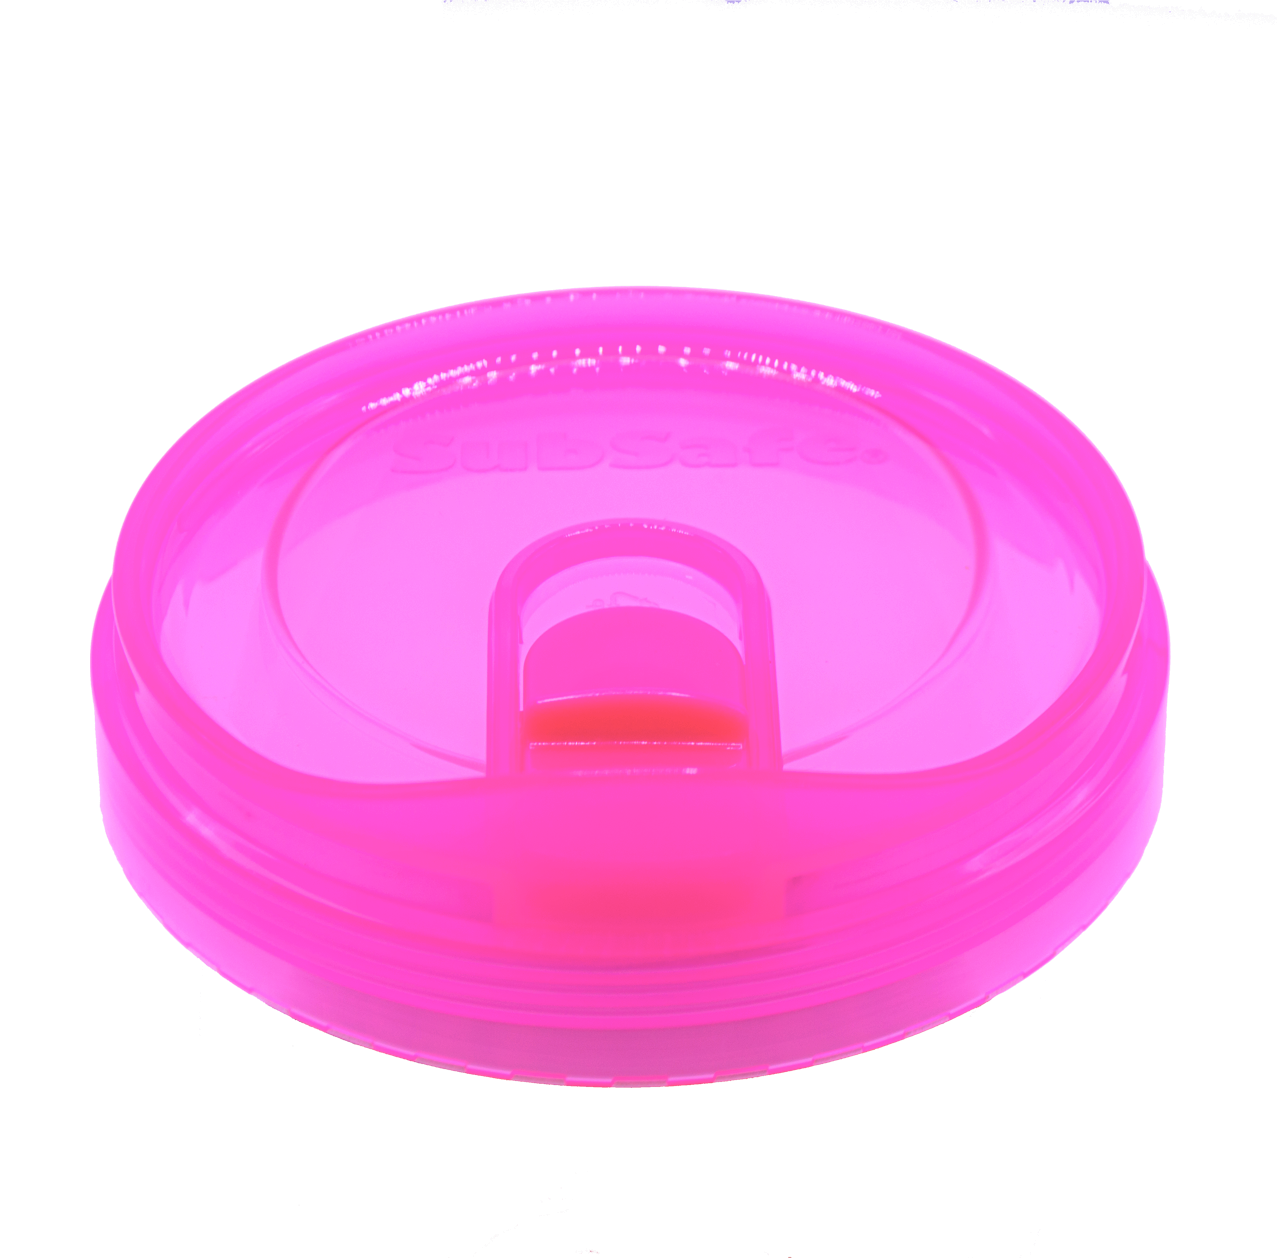 Drinking Lid Accessory - Fits on SubSafe base